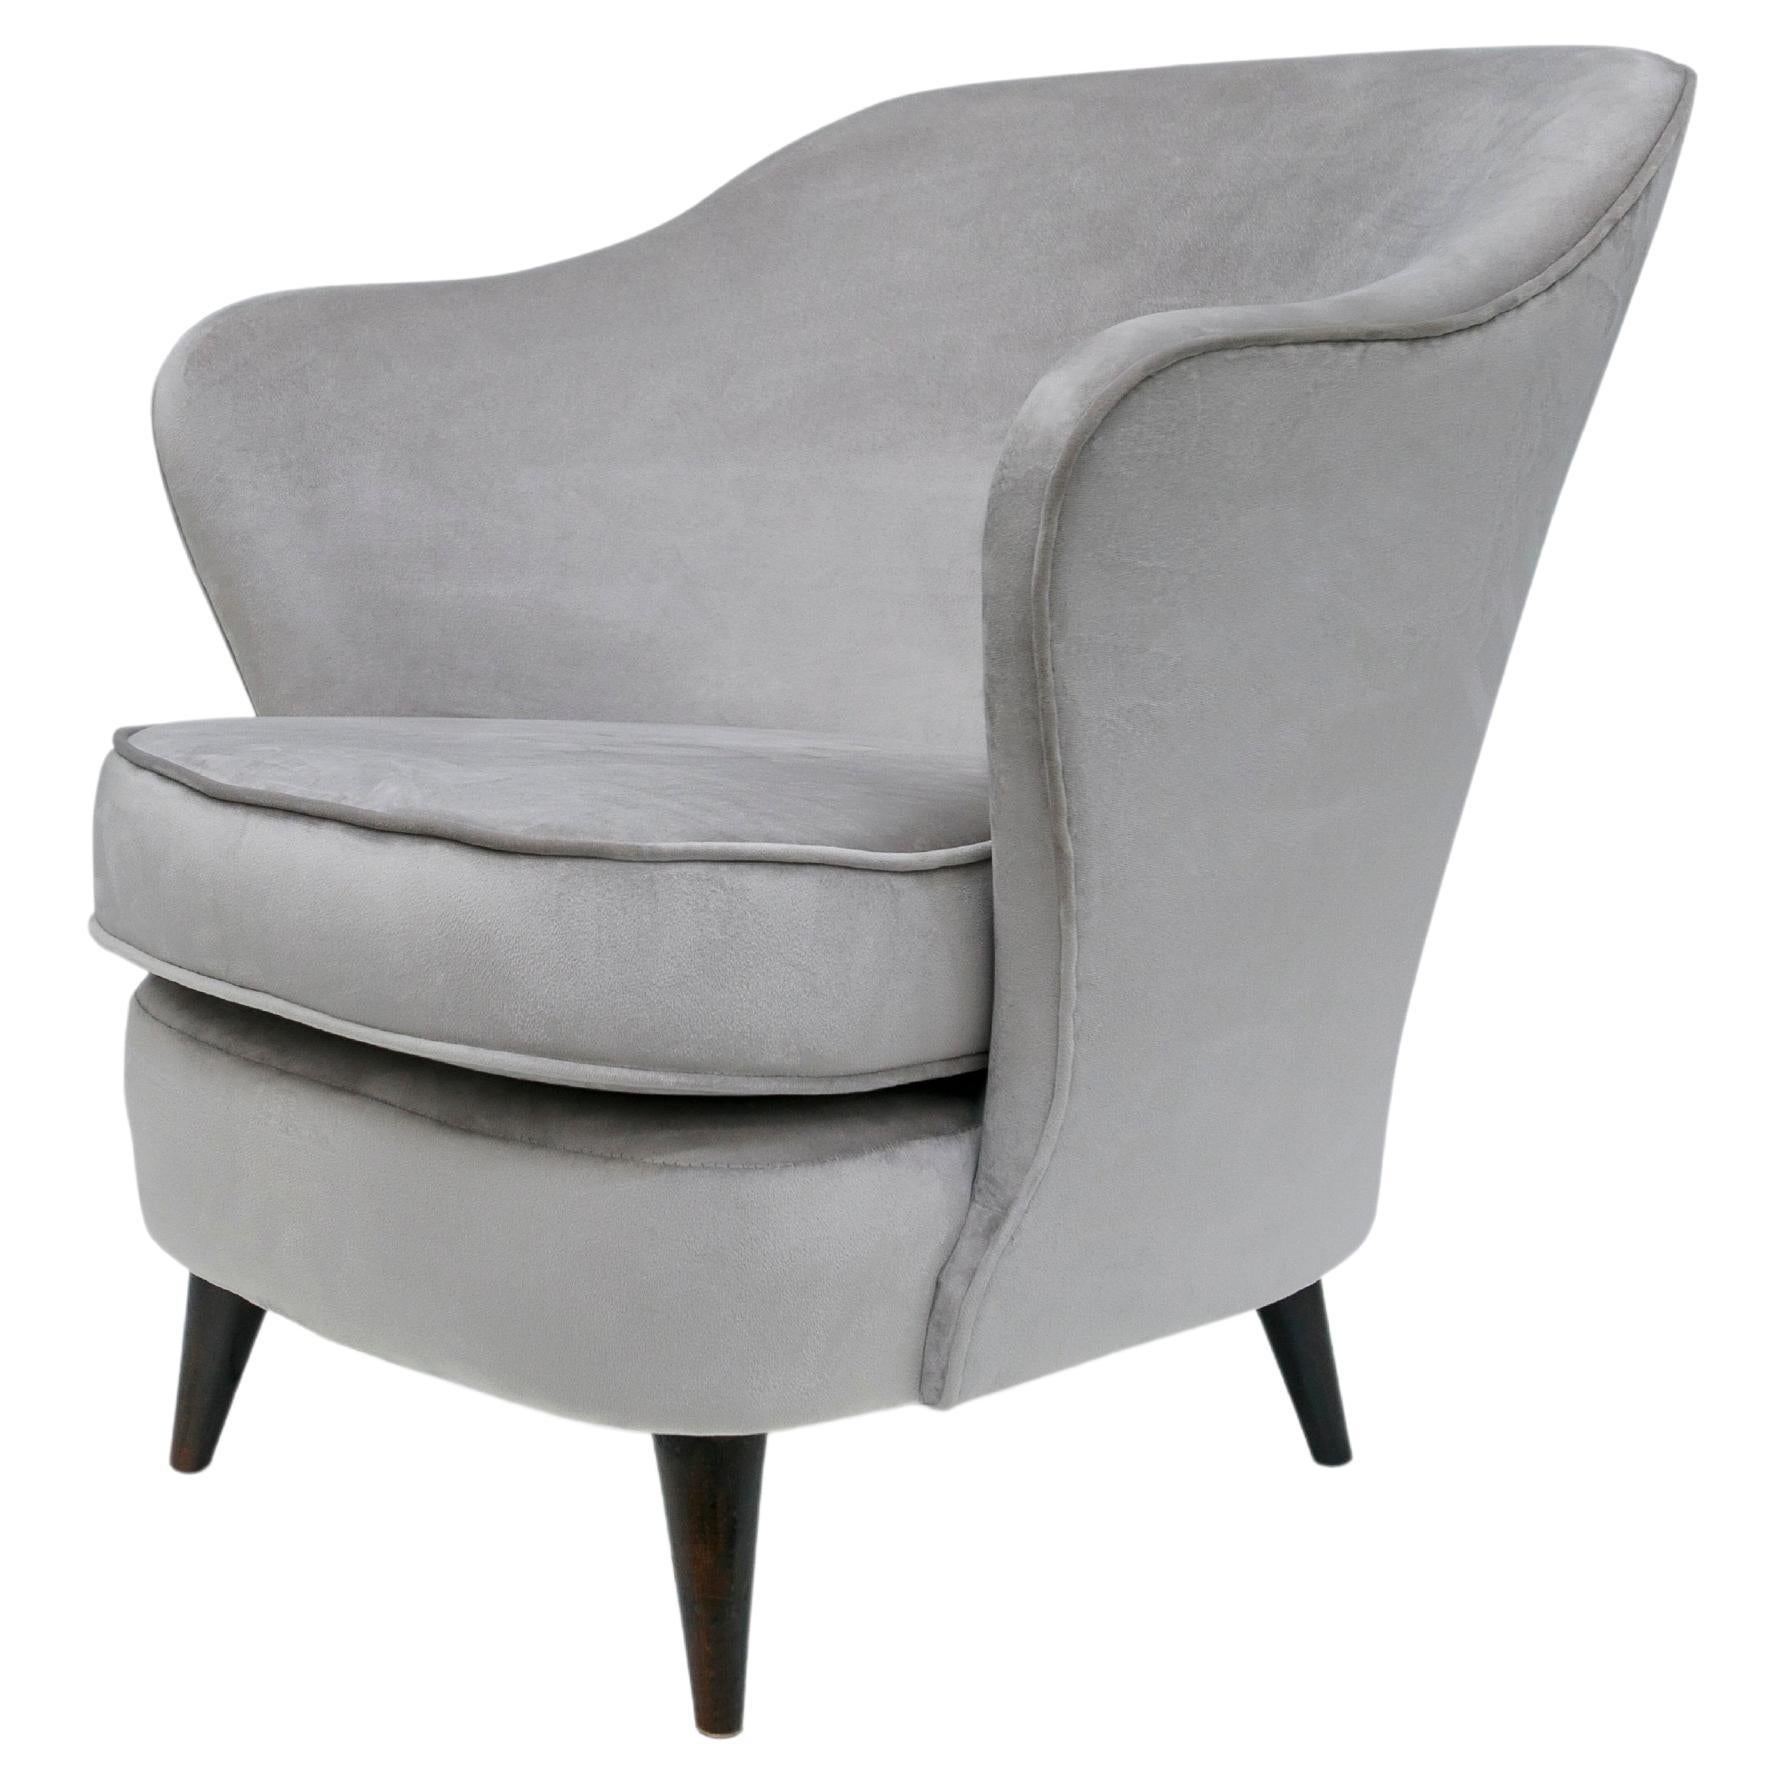 Slim Armchair in Grey Fabric Attributed to  Joaquim Tenreiro, c. 1950s For Sale